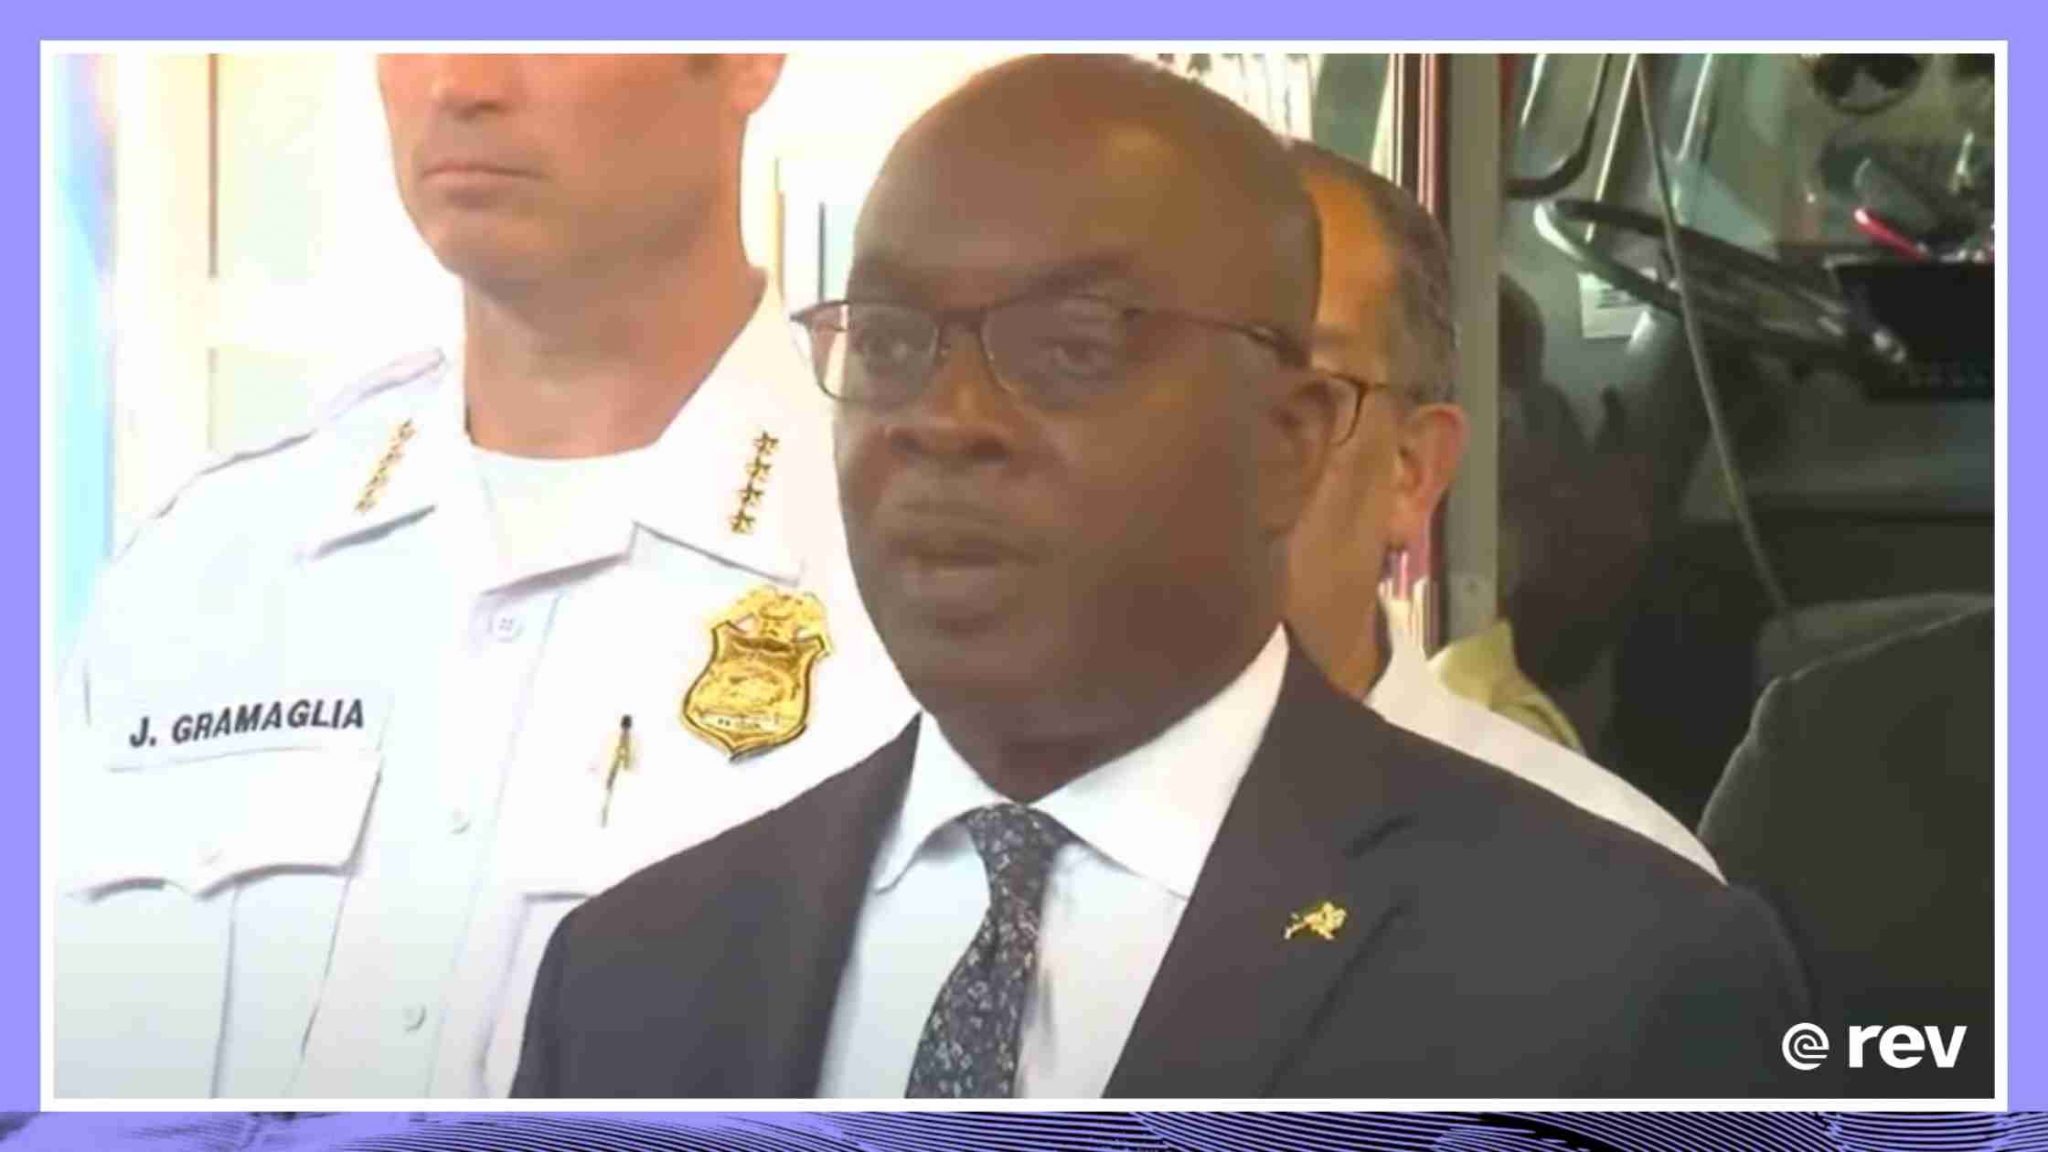 Buffalo Mayor Byron Brown news conference day after deadly mass shooting 5/15/22 Transcript